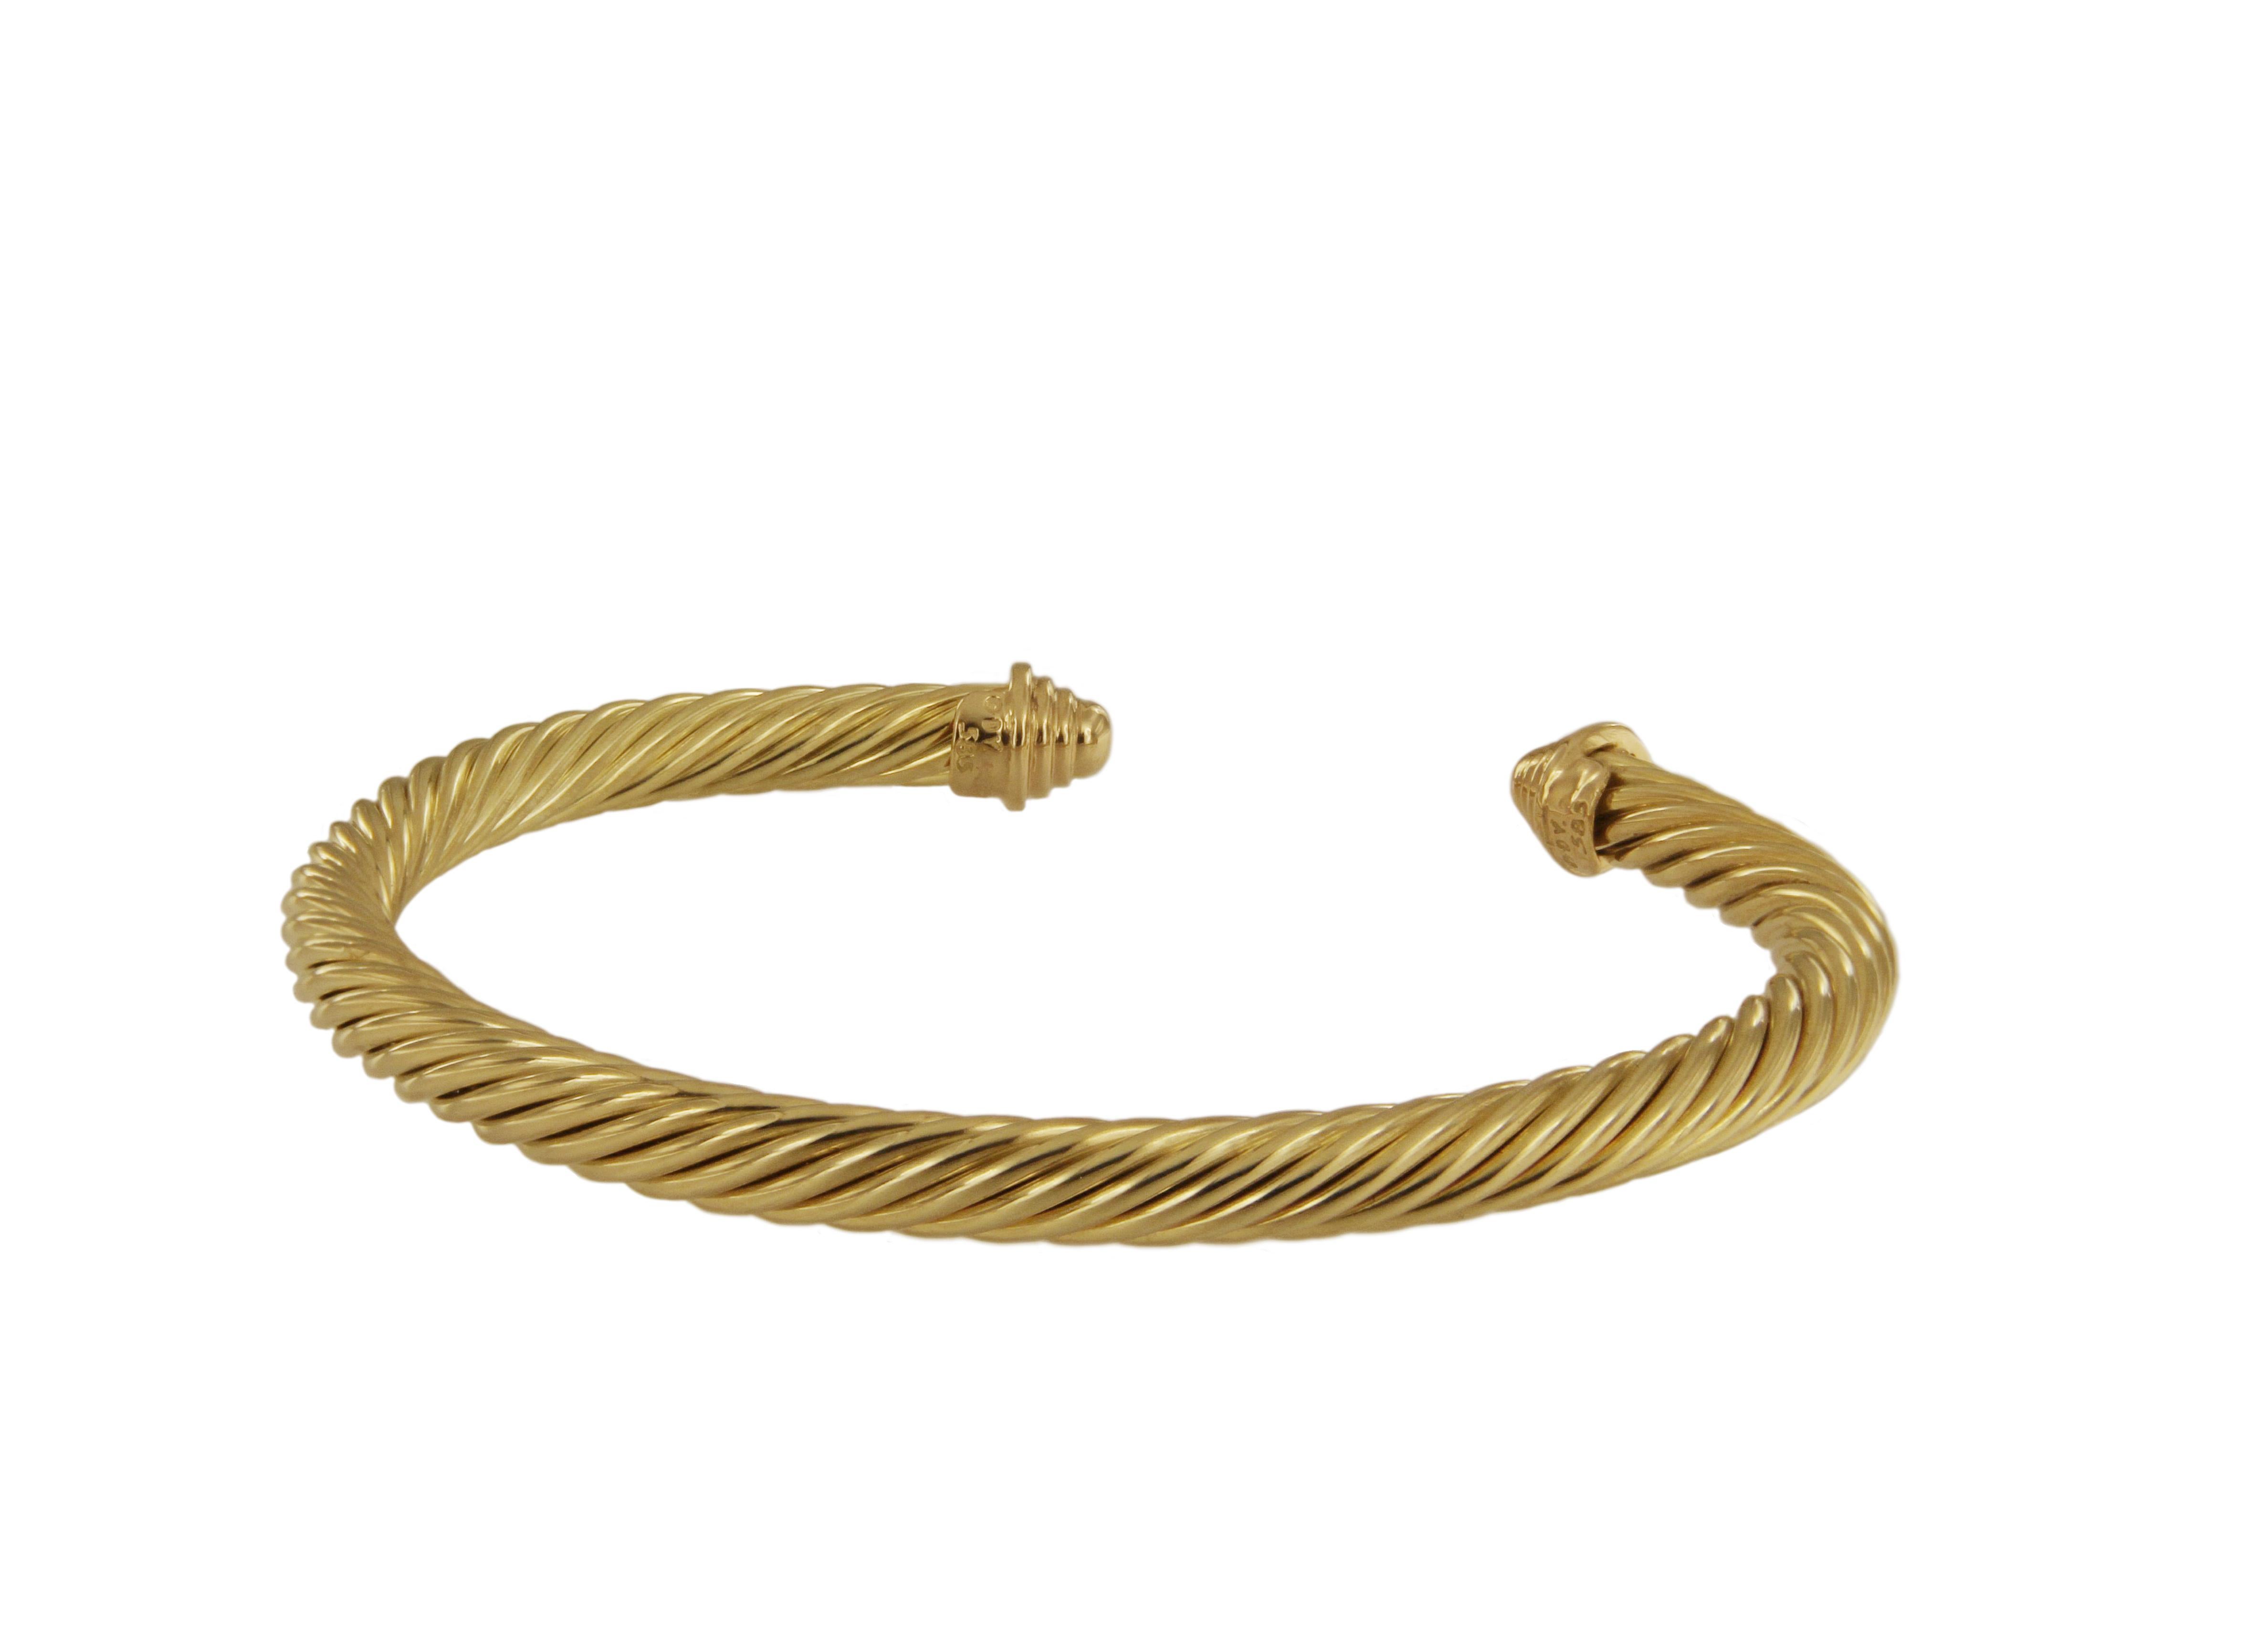 18k Yellow Gold
Weight: 13.5gr
Width: 5mm
Medium size
Comes with David Yurman box
New, no tags